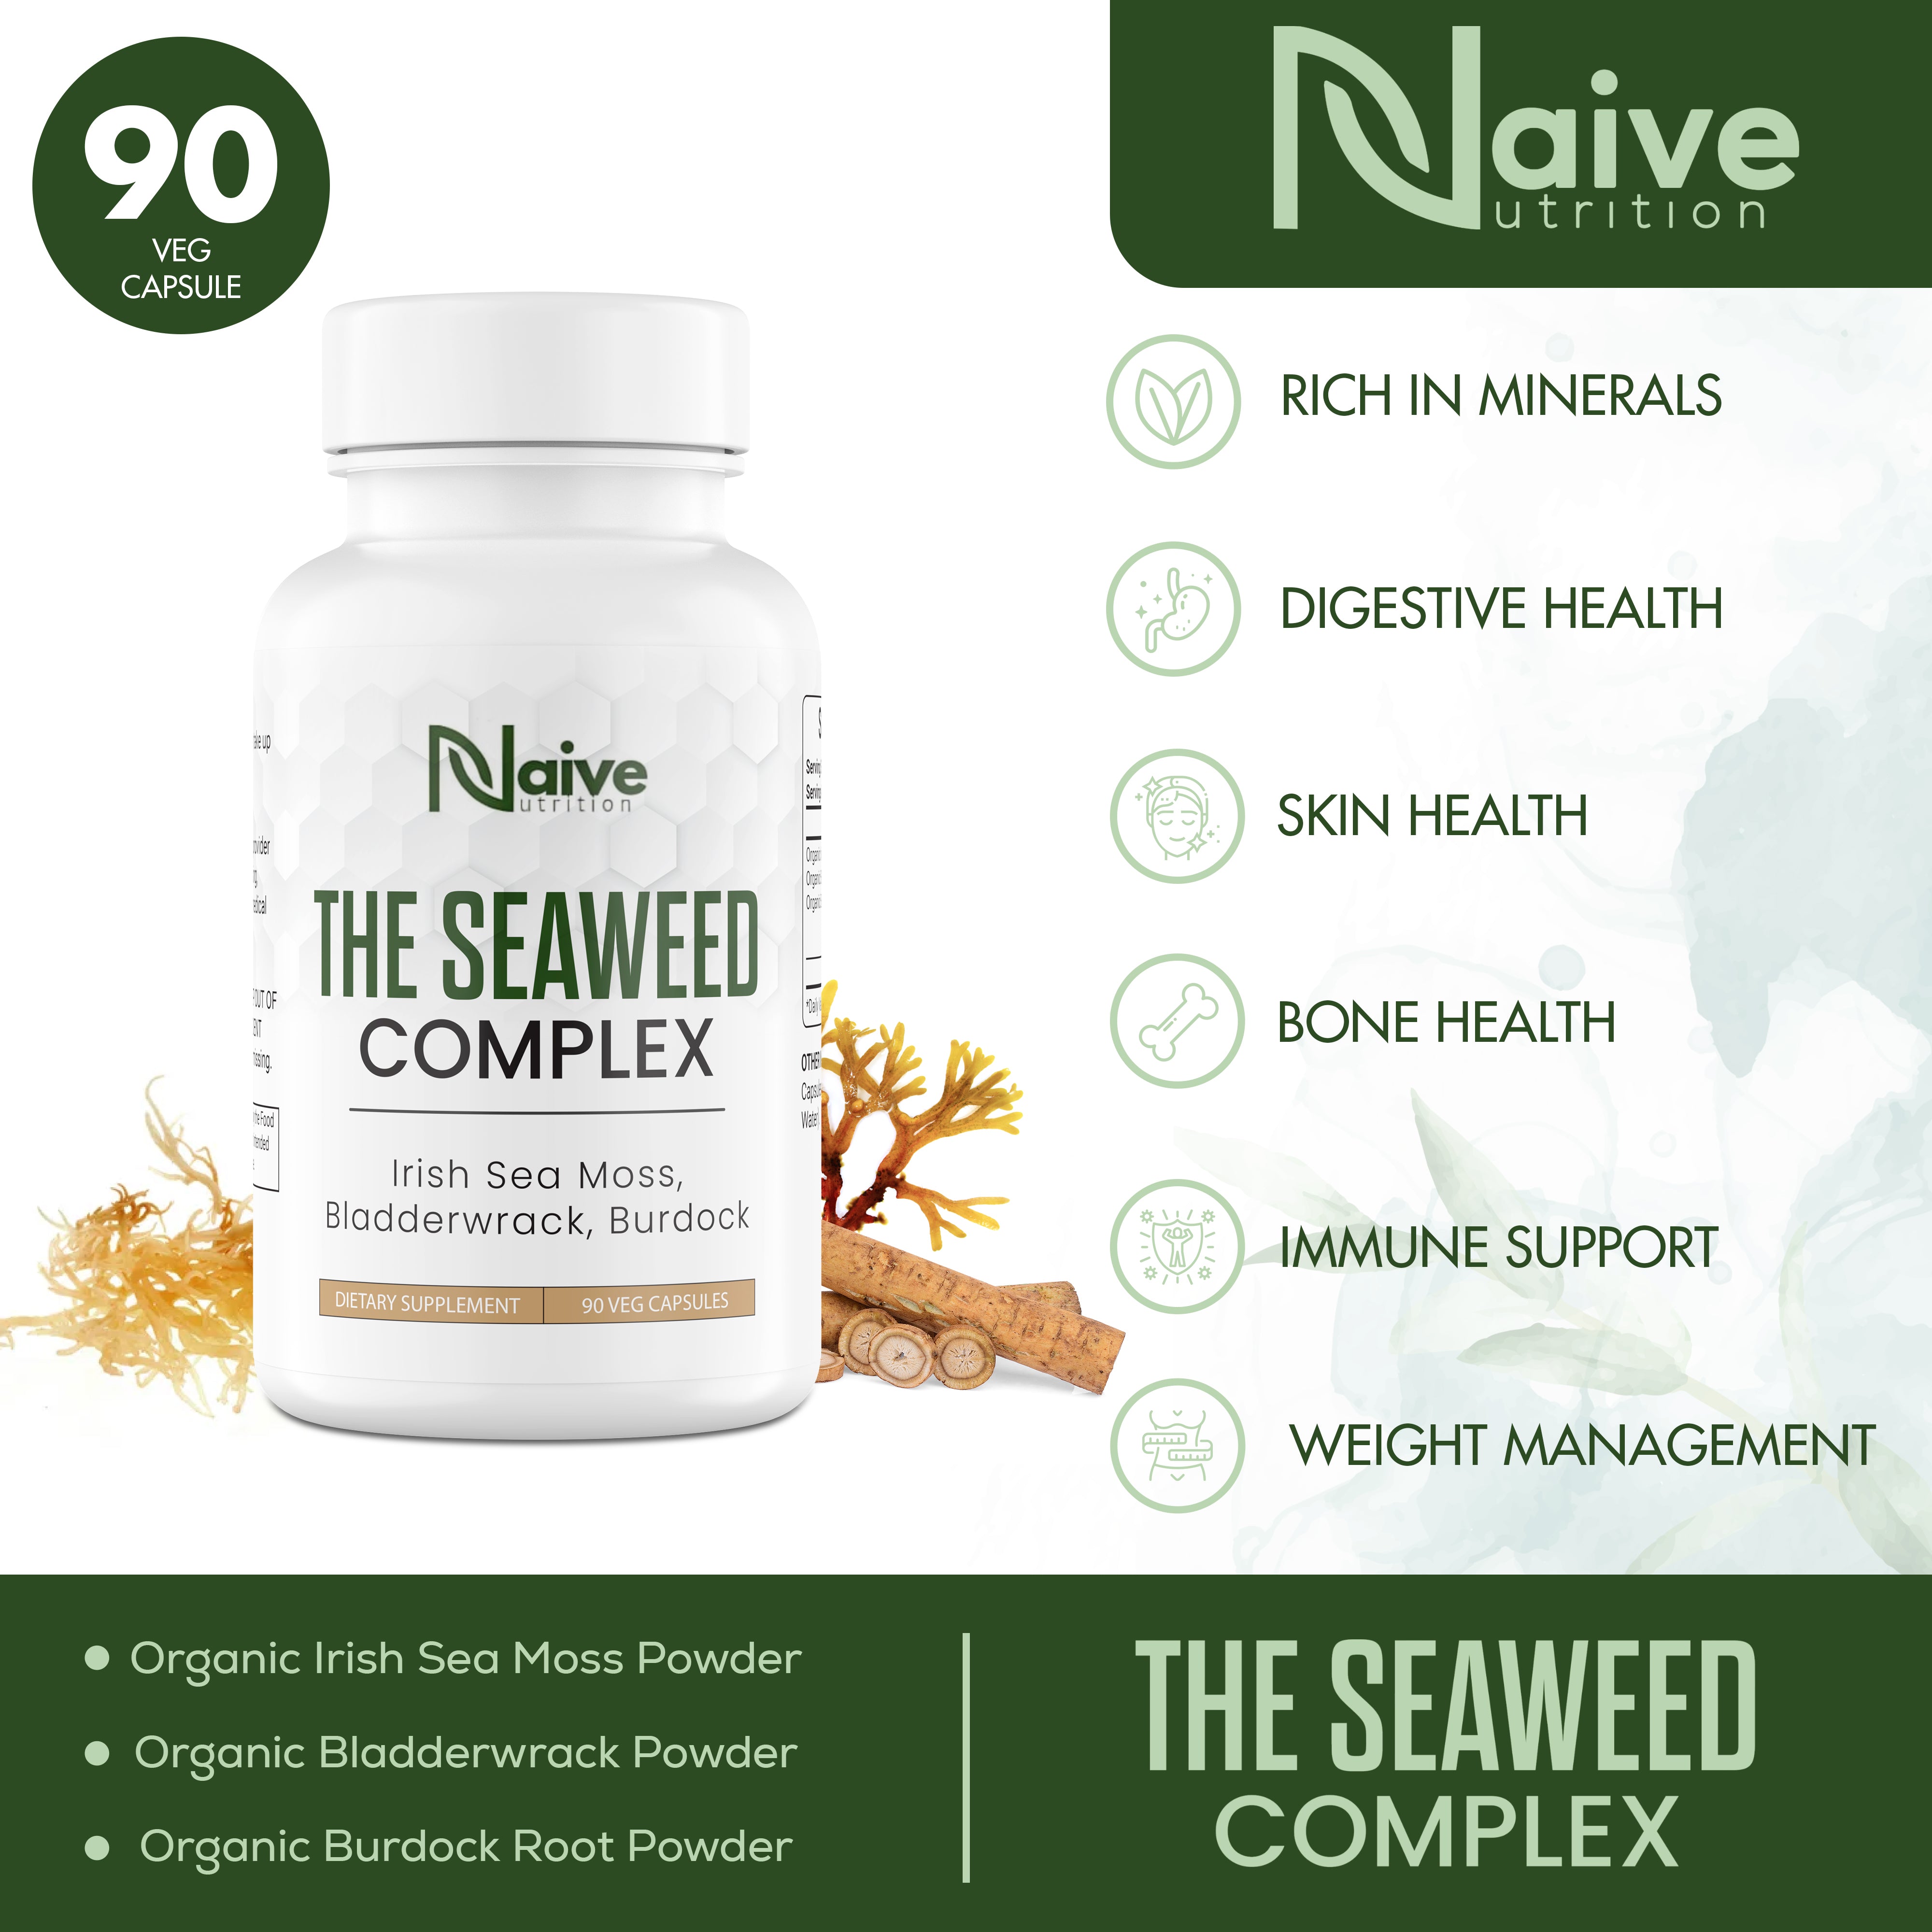 Naive Nutrition The Seaweed Complex, 1000 mg, 90 Vegetarian Capsules